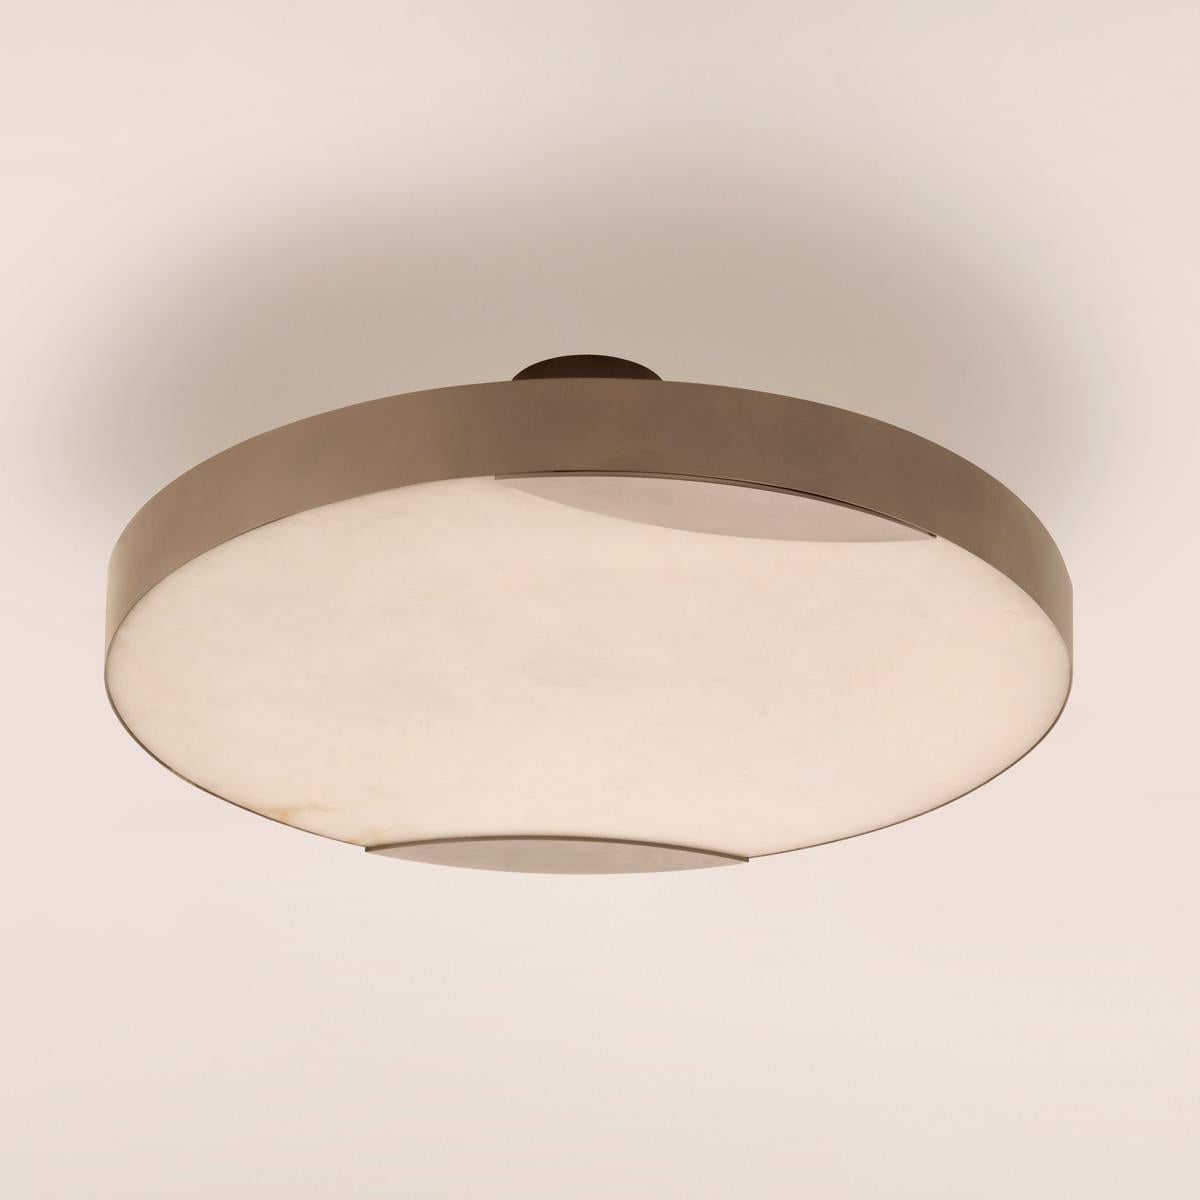 Modern Cloud N.1 Ceiling Light by Gaspare Asaro-Peltro Finish For Sale